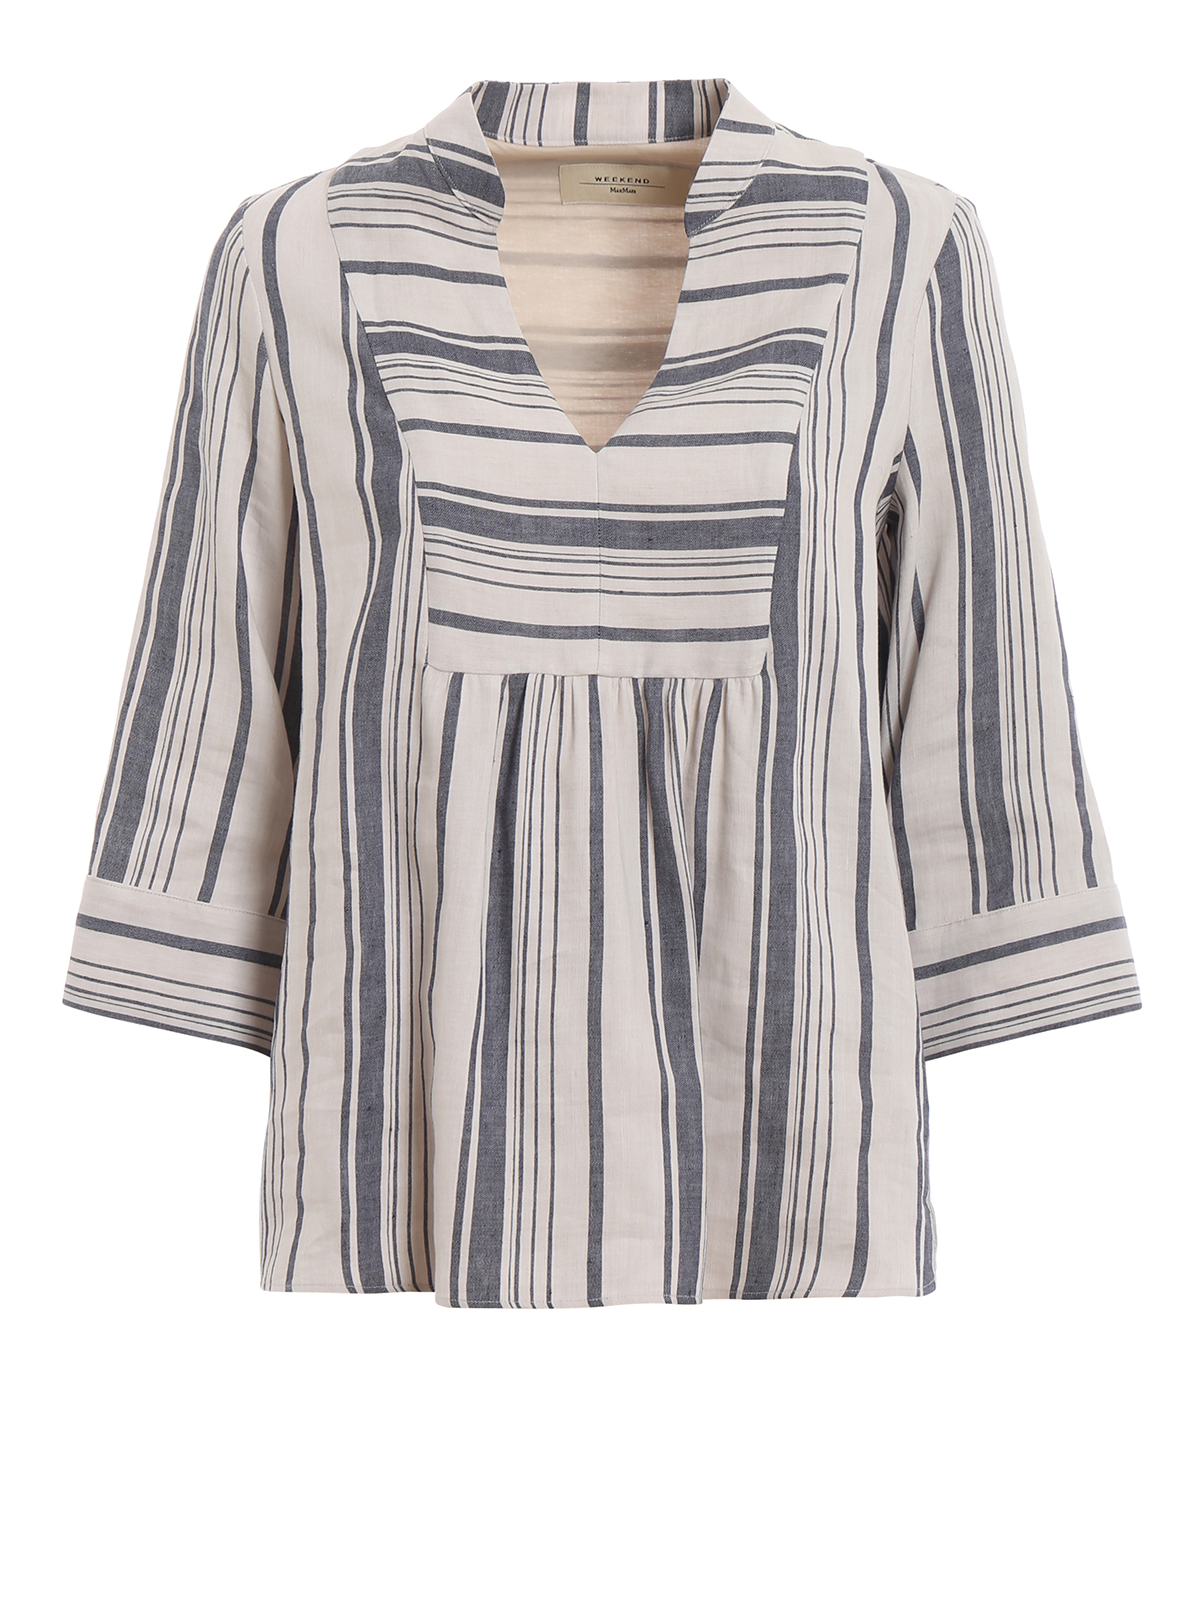 Blouses Weekend Max Mara - Tandem linen and cotton blouse - 51112191000002